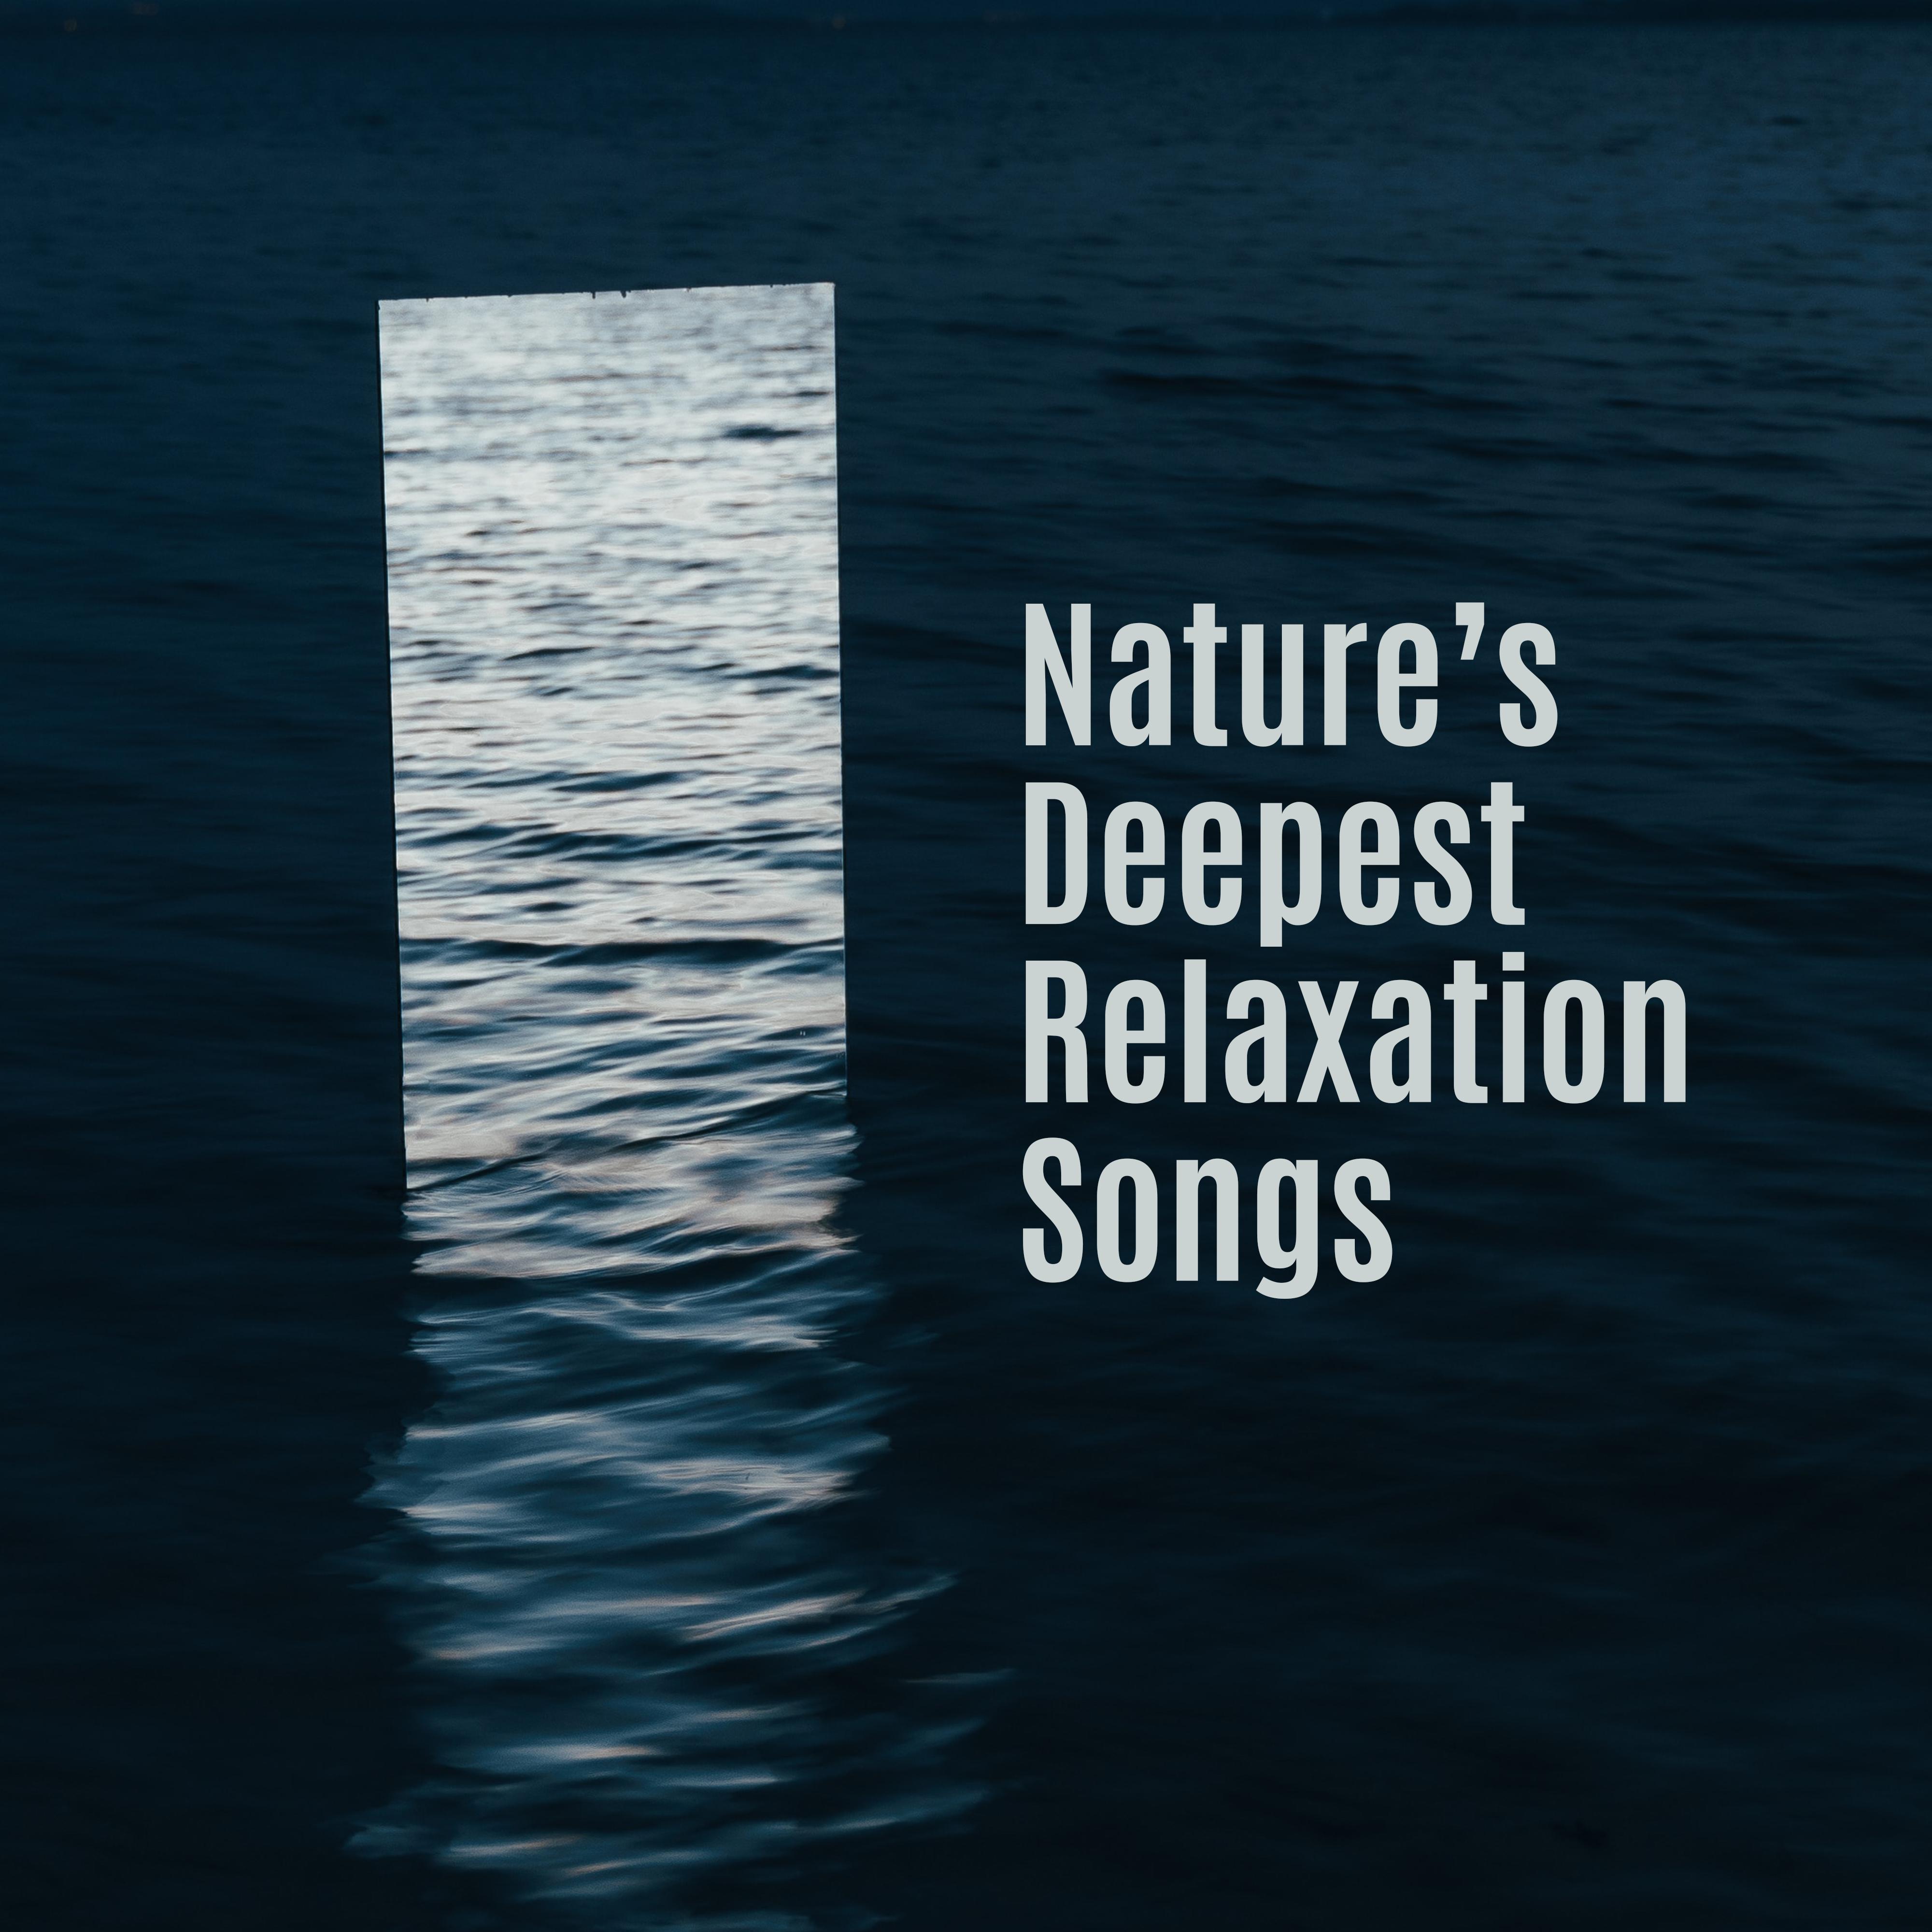 Nature’s Deepest Relaxation Songs – 2019 New Age Beautiful Piano Melodies with Nature Sounds of Birds, Forest, Water & More, Music for Relax, Deep Sleep, Calm Down, Rest After Work